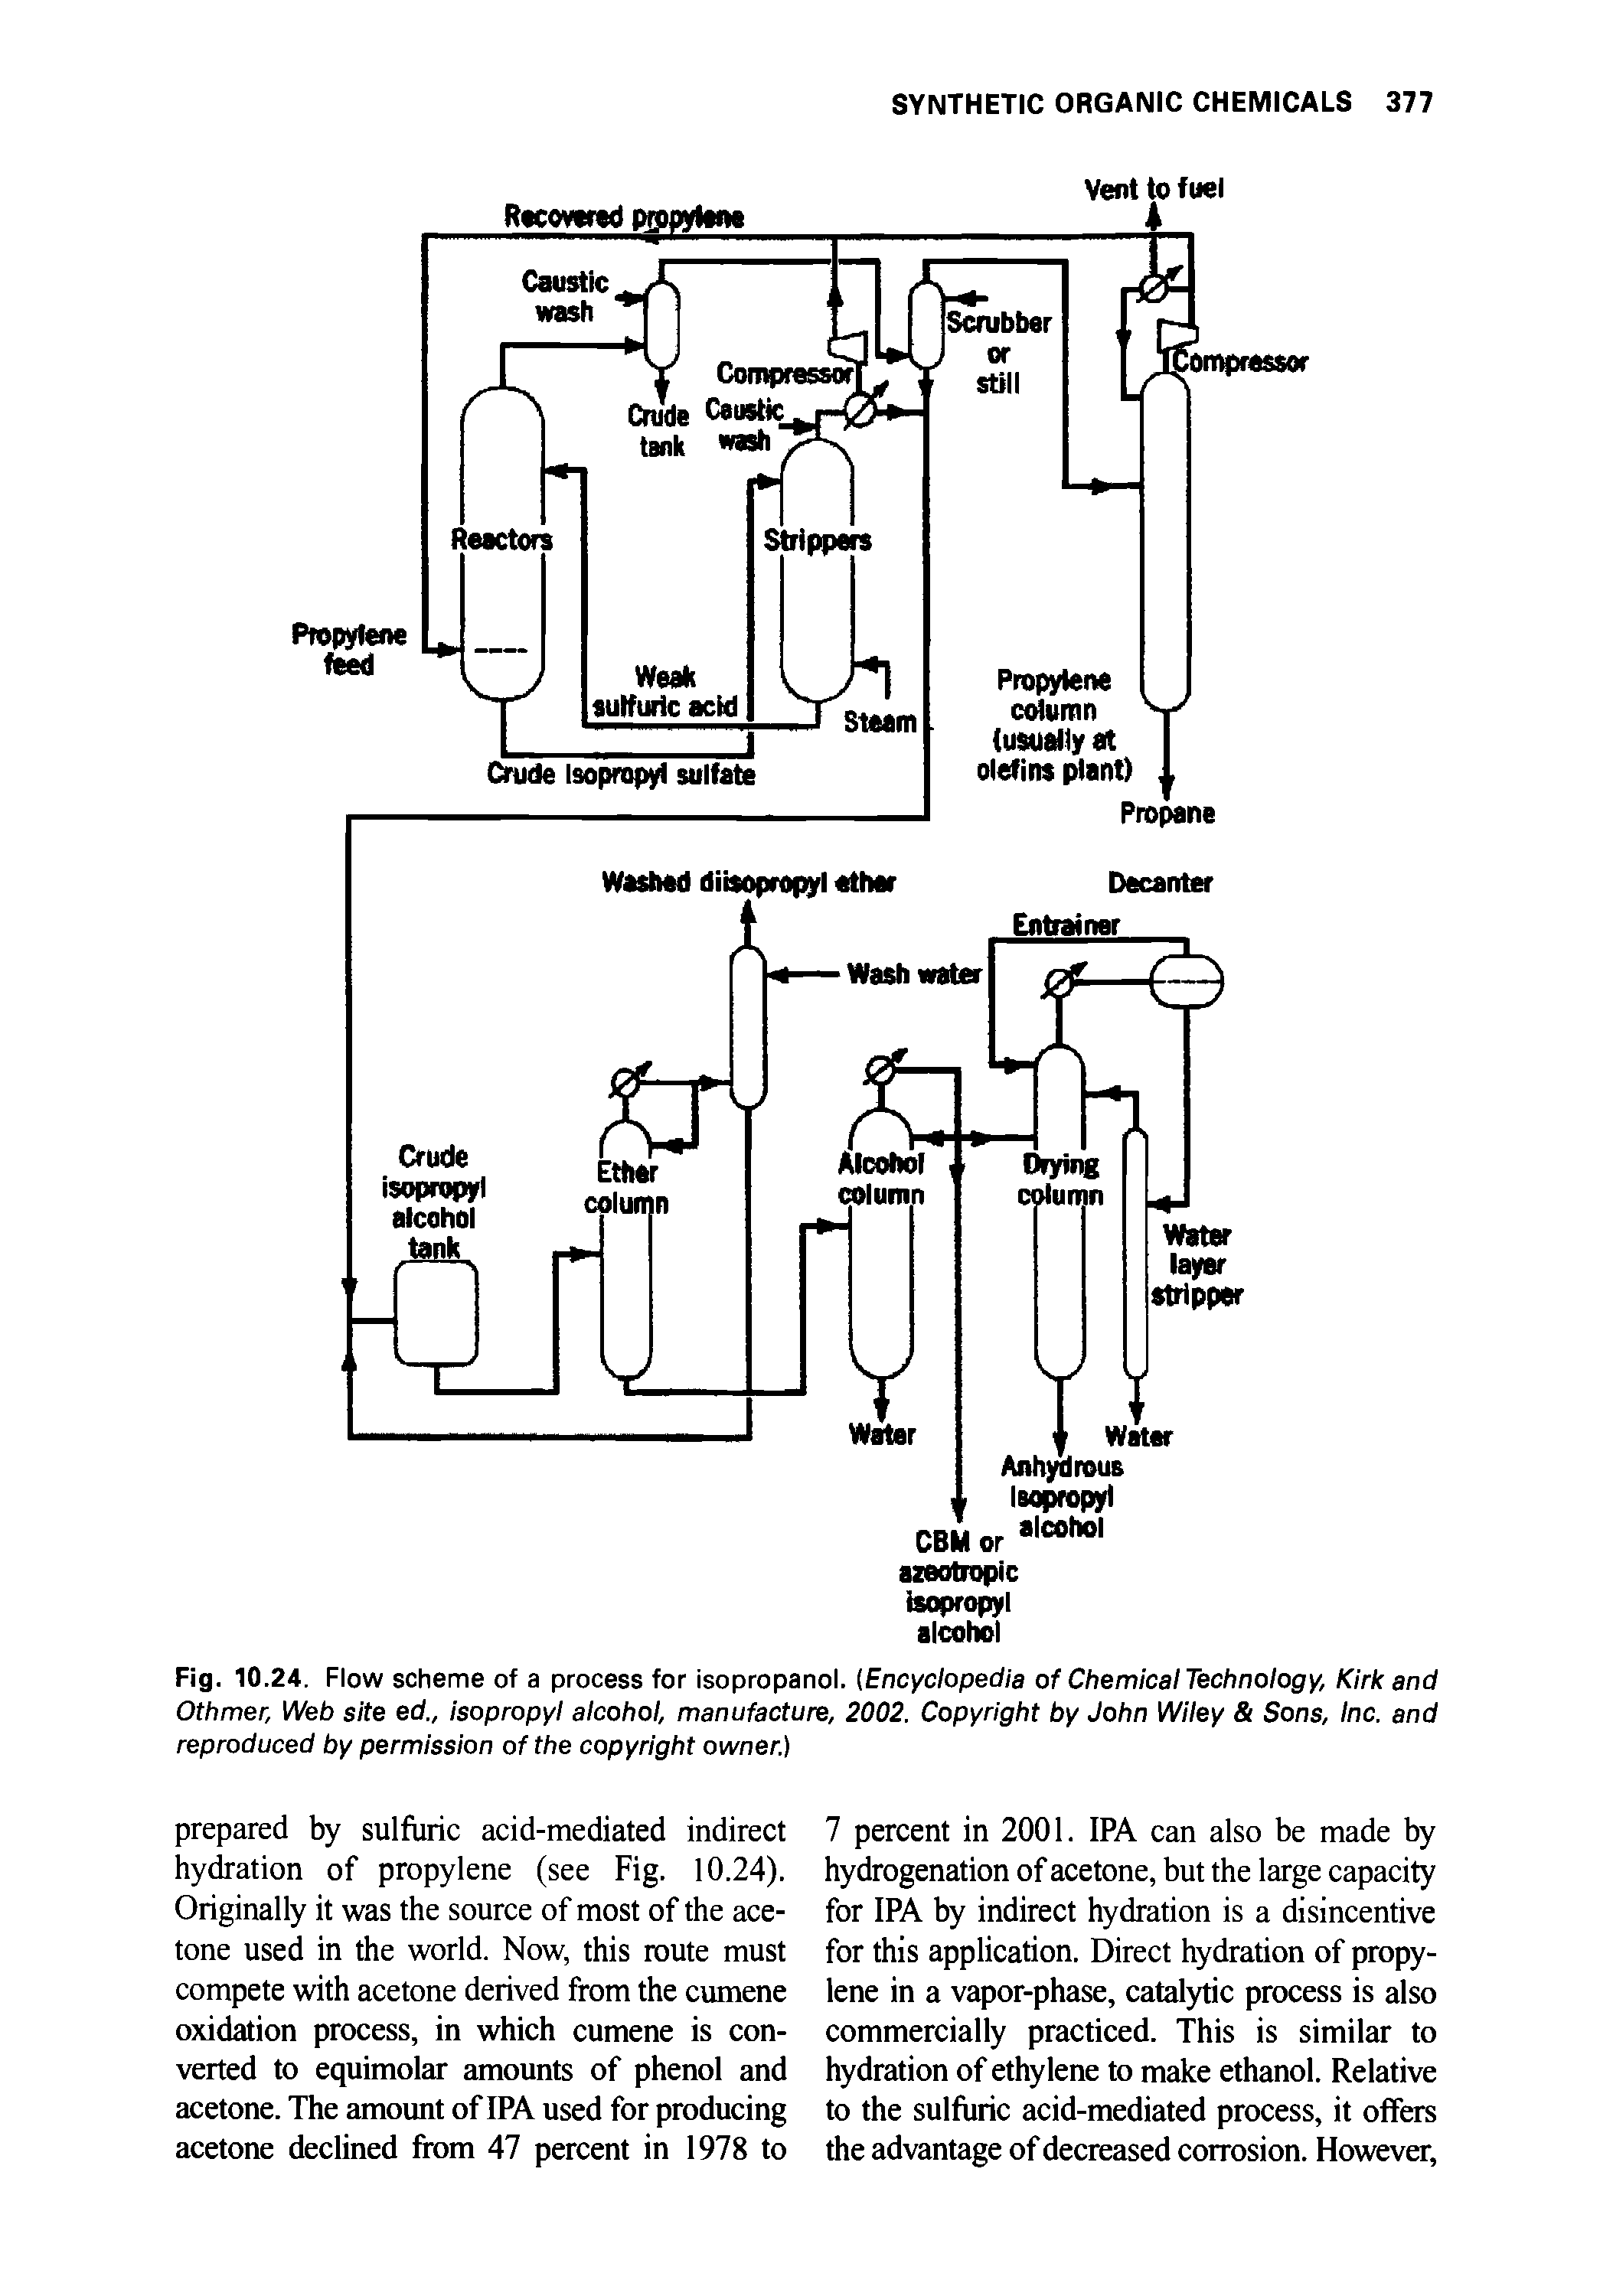 Fig. 10.24. Flow scheme of a process for isopropanol. (Encyclopedia of Chemical Technology, Kirk and Othmer, Web site ed isopropyl alcohol, manufacture, 2002. Copyright by John Wiley Sons, Inc. and reproduced by permission of the copyright owner.)...